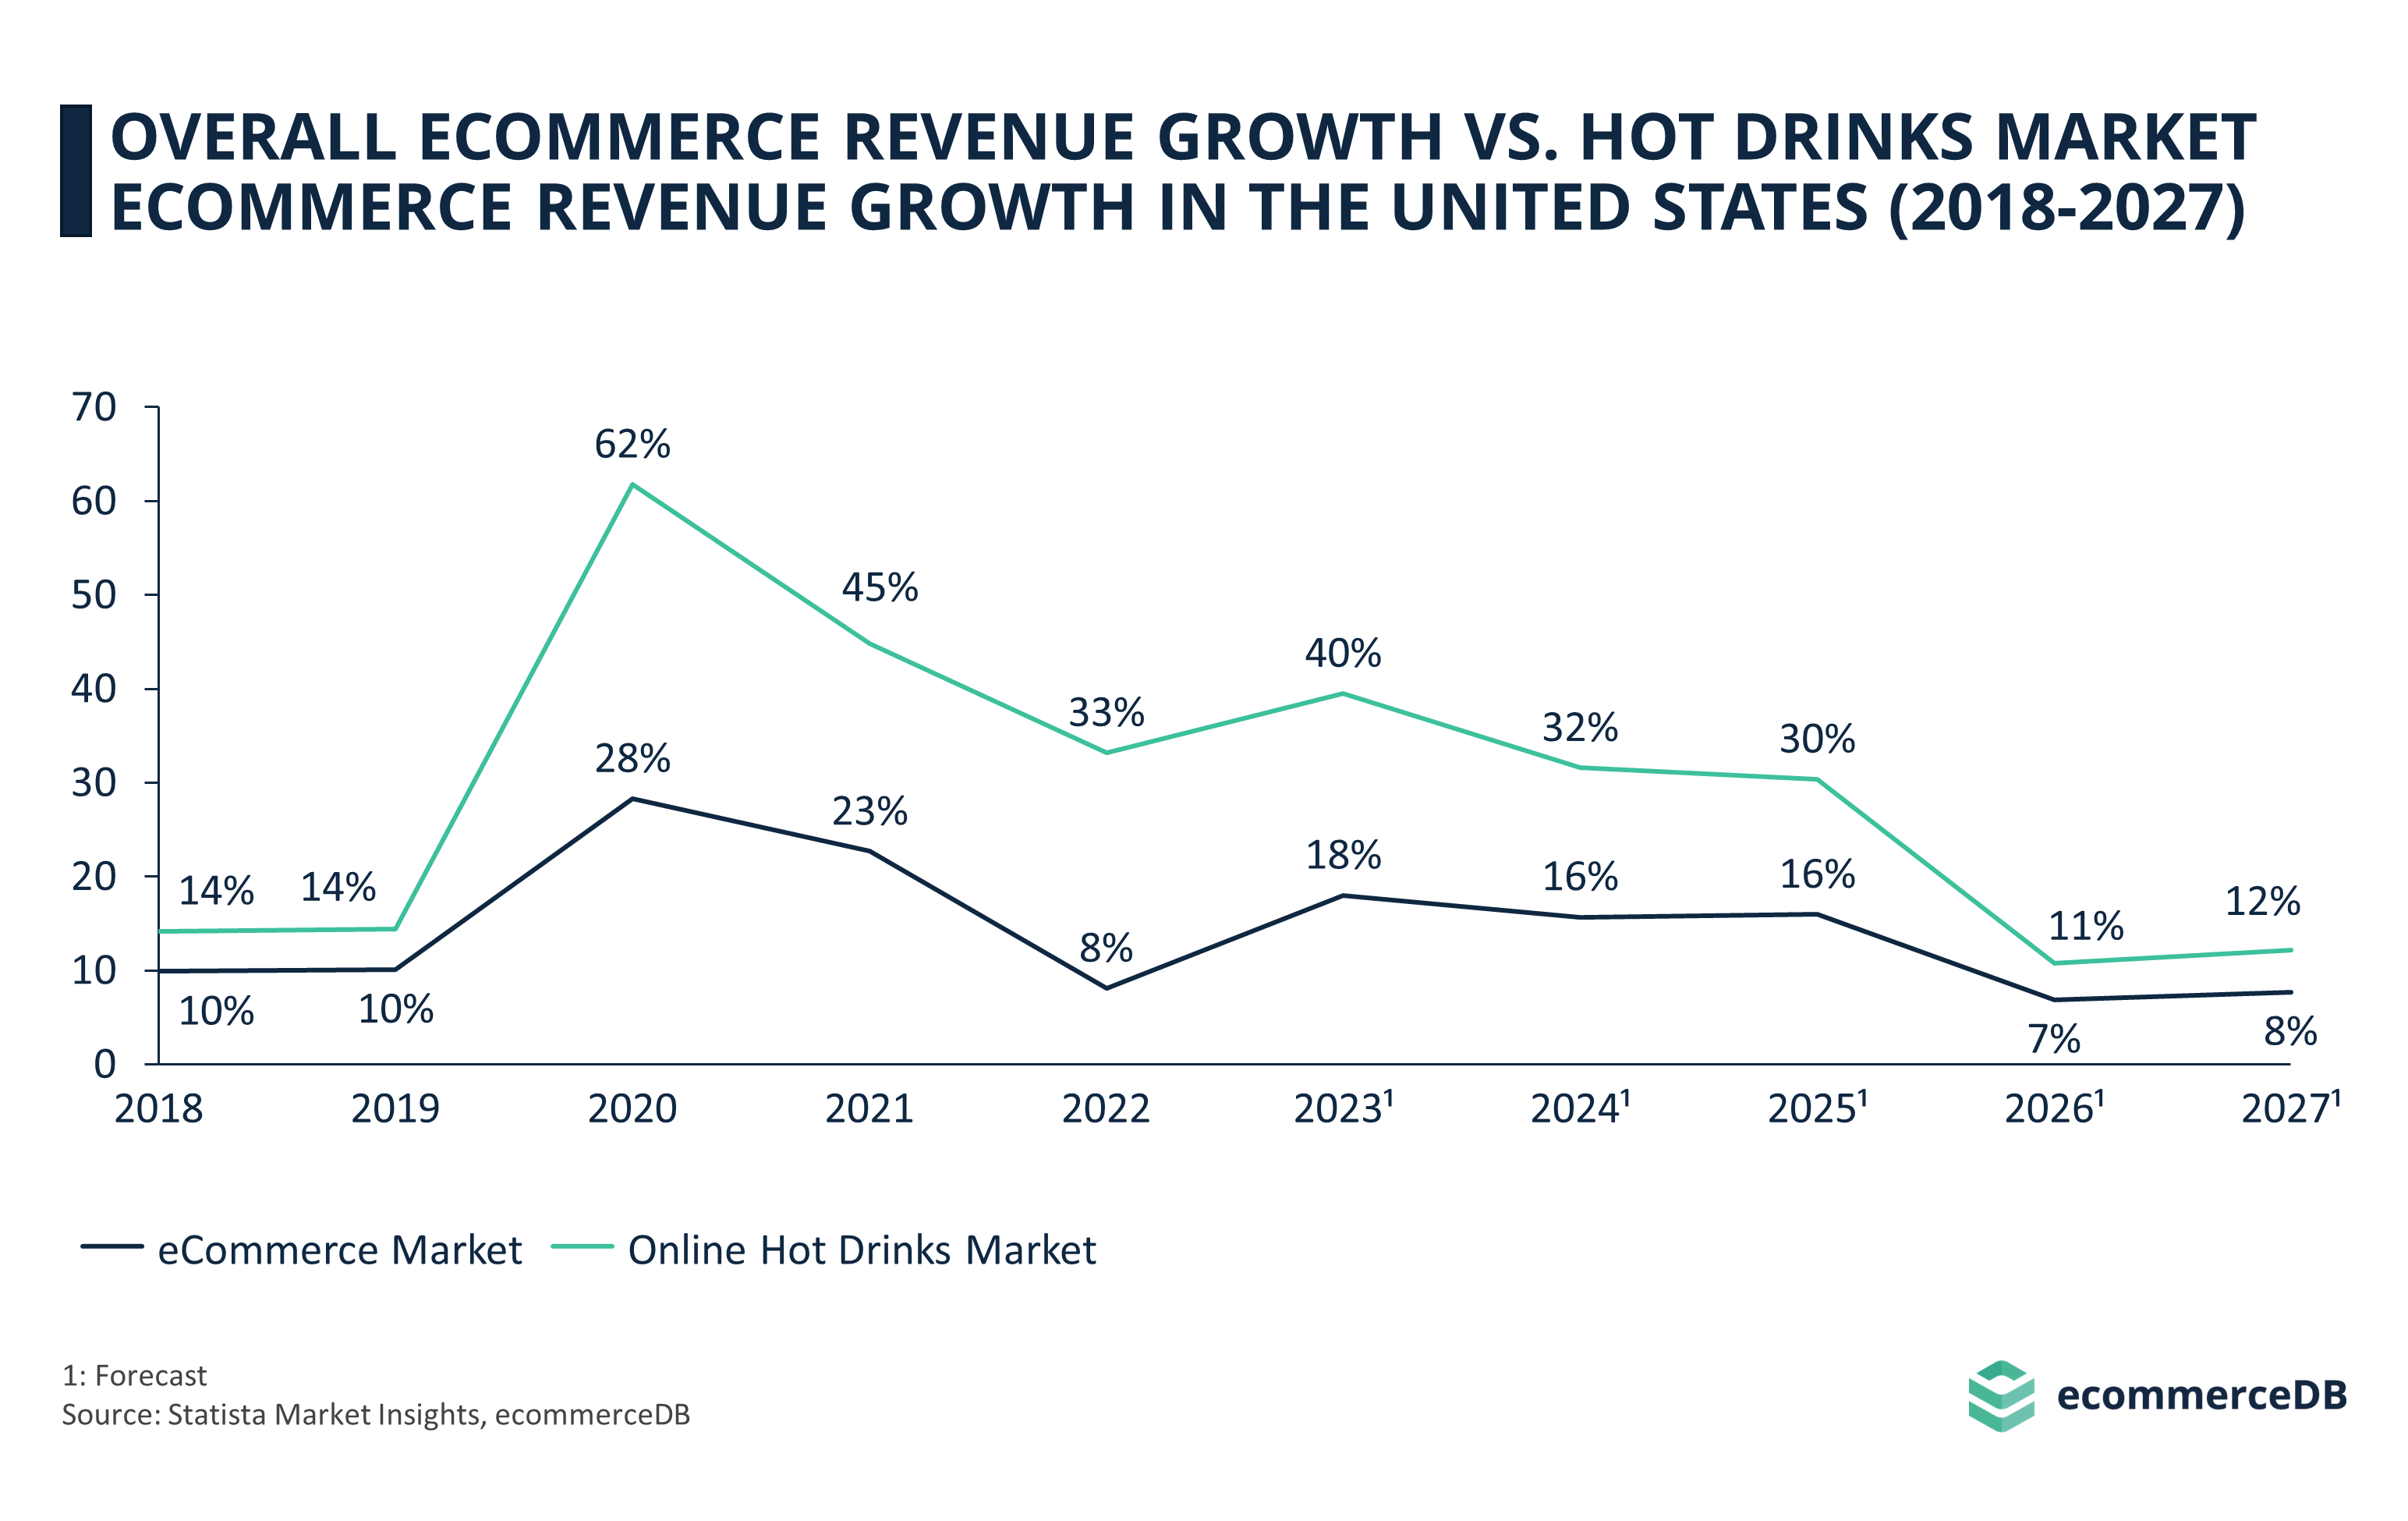 Online Hot Drinks Market in the United States | ecommerceDB.com